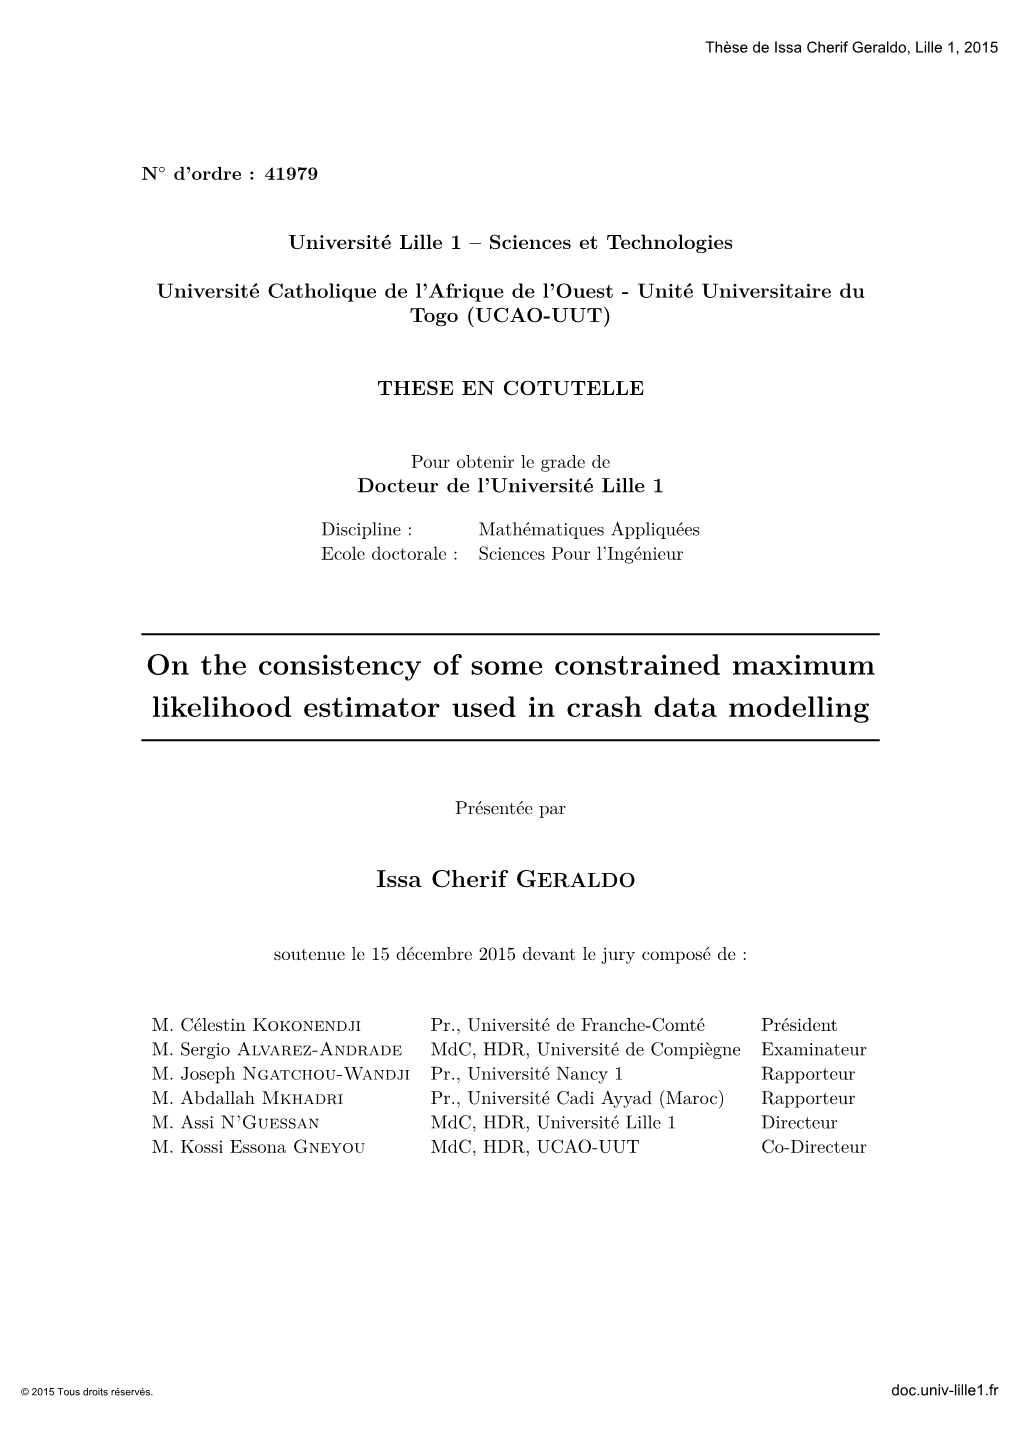 On the Consistency of Some Constrained Maximum Likelihood Estimator Used in Crash Data Modelling